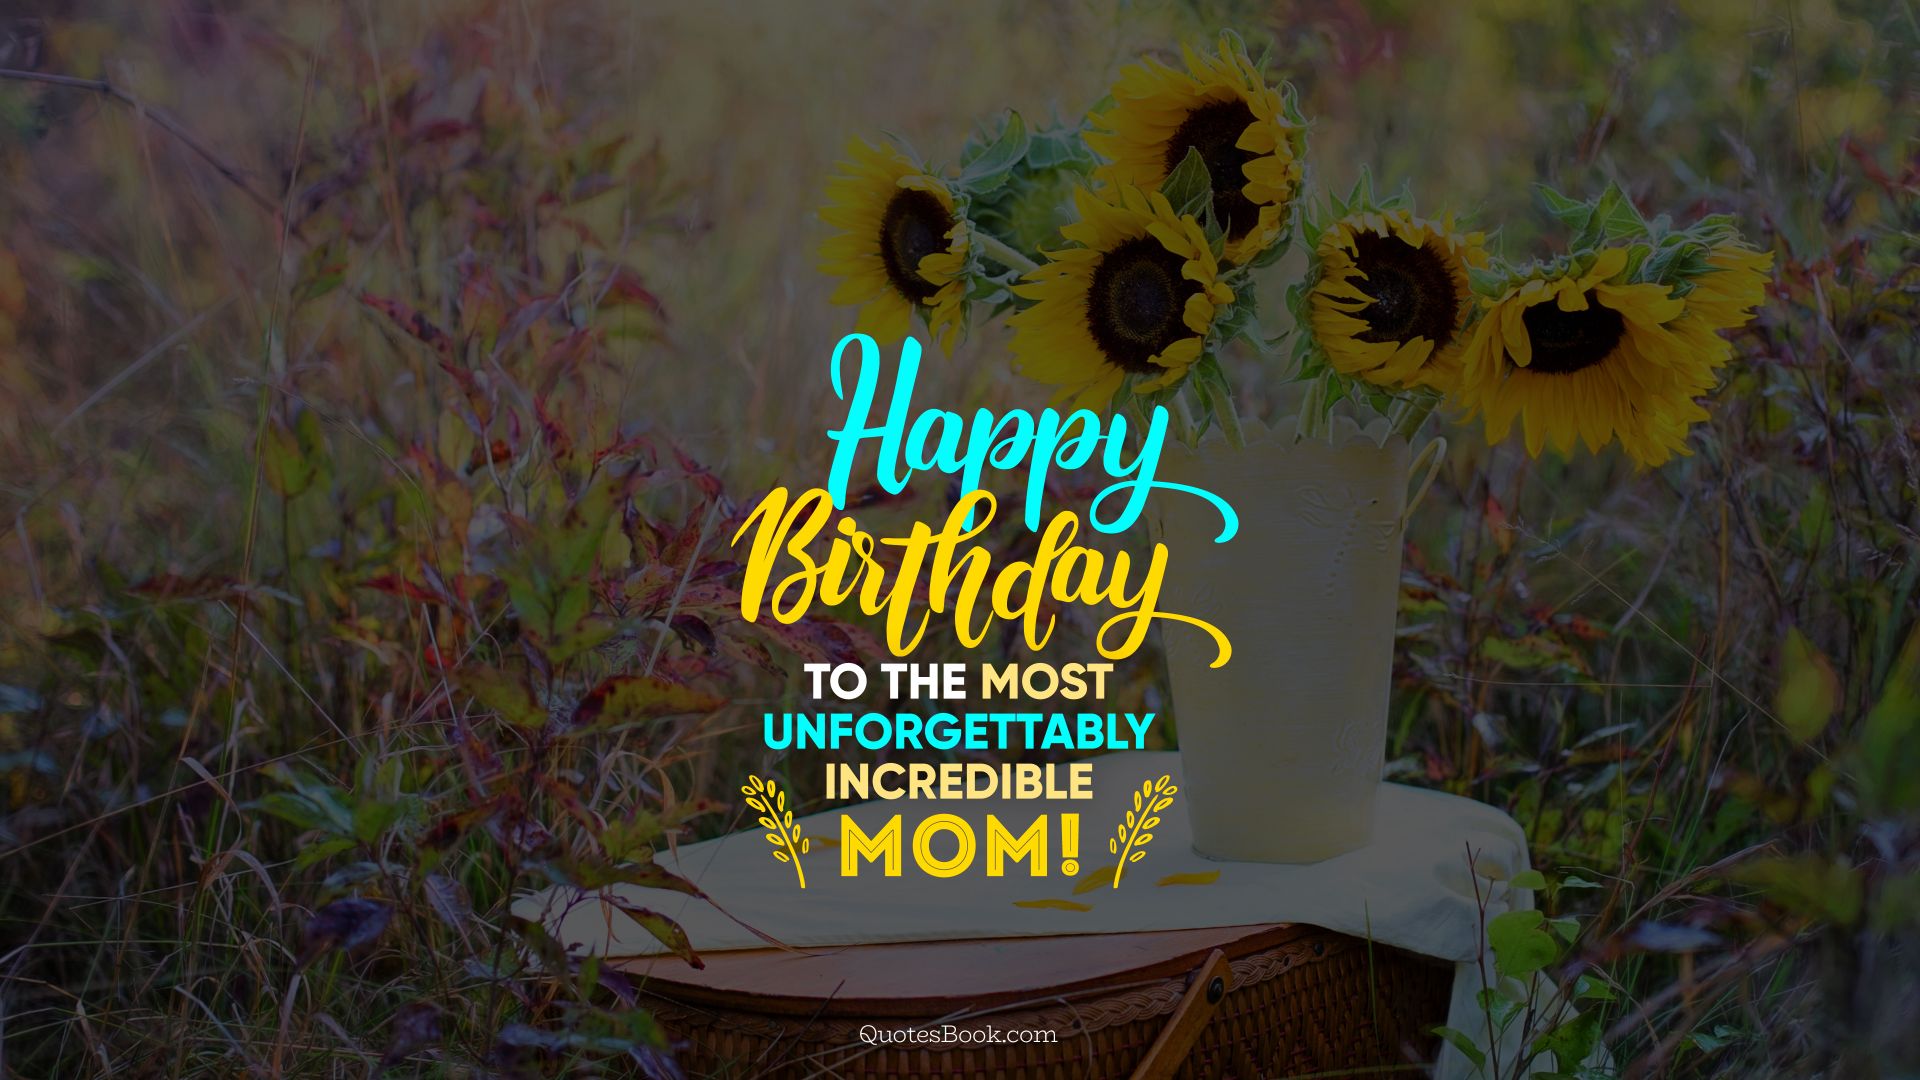 Happy birthday to the most unforgettably incredible Mom!